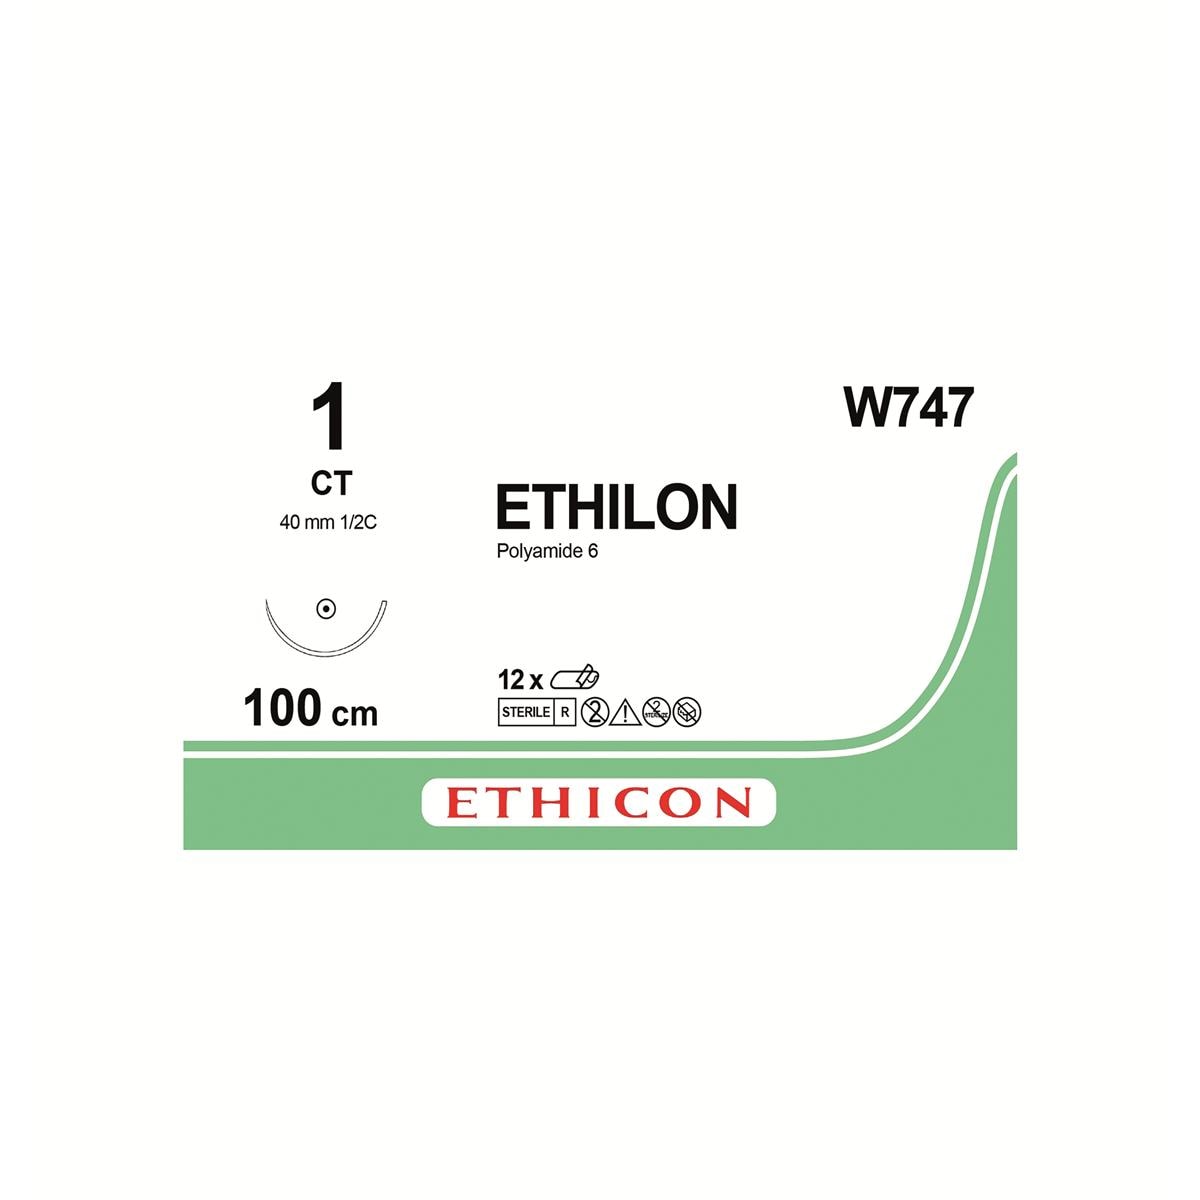 ETHILON Sutures Black Uncoated 100cm 1-0 1/2 Circle Taper Point CT 40mm W747 12pk